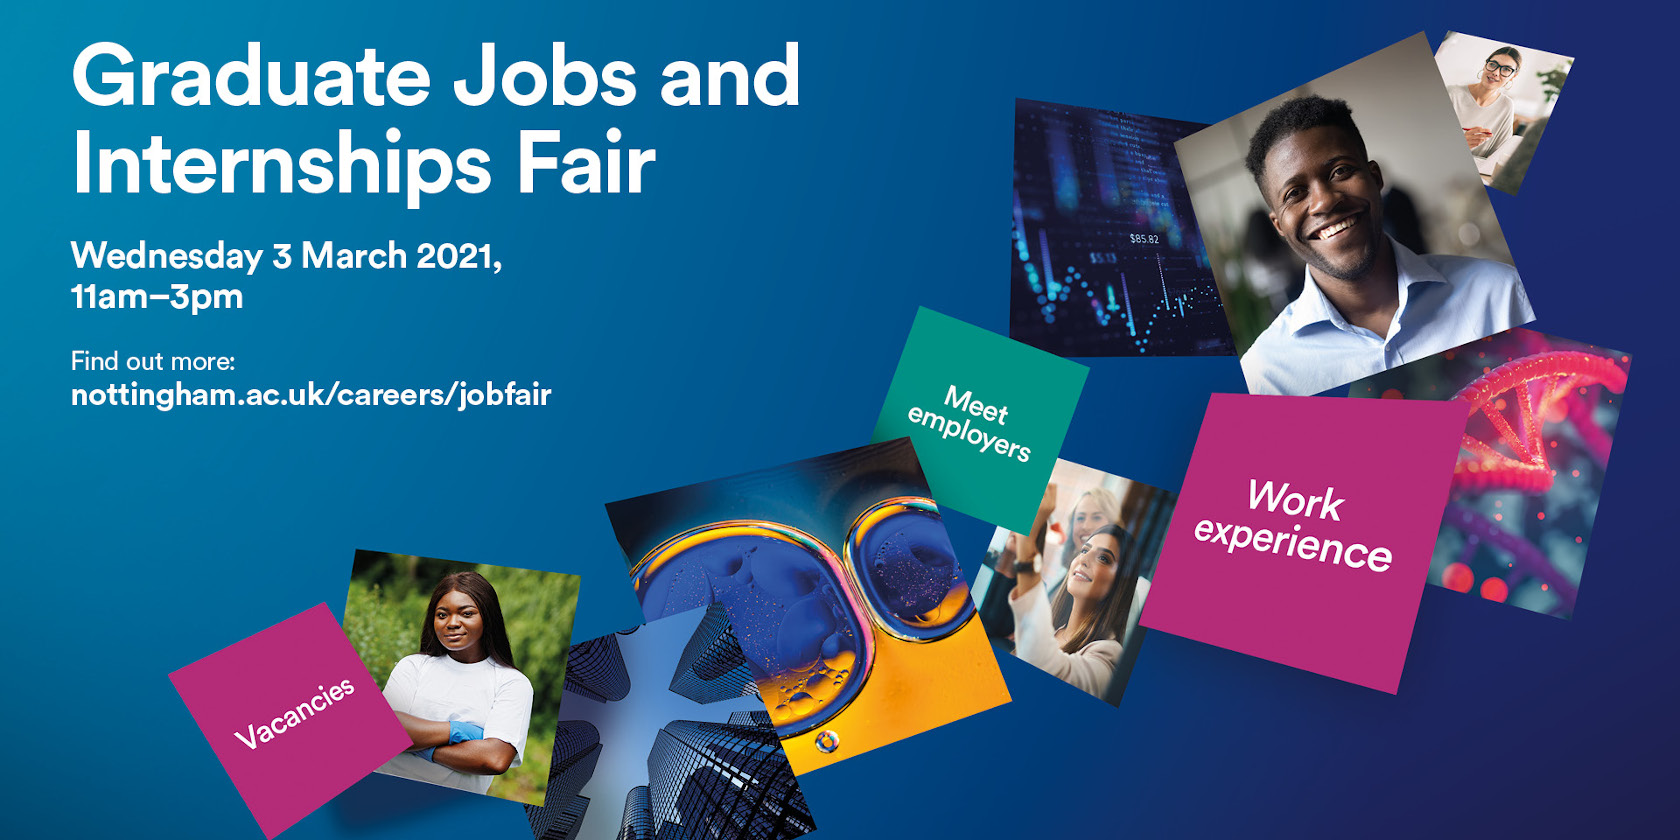 Various images for the Graduate Jobs and Internships Fair 3 March 2021